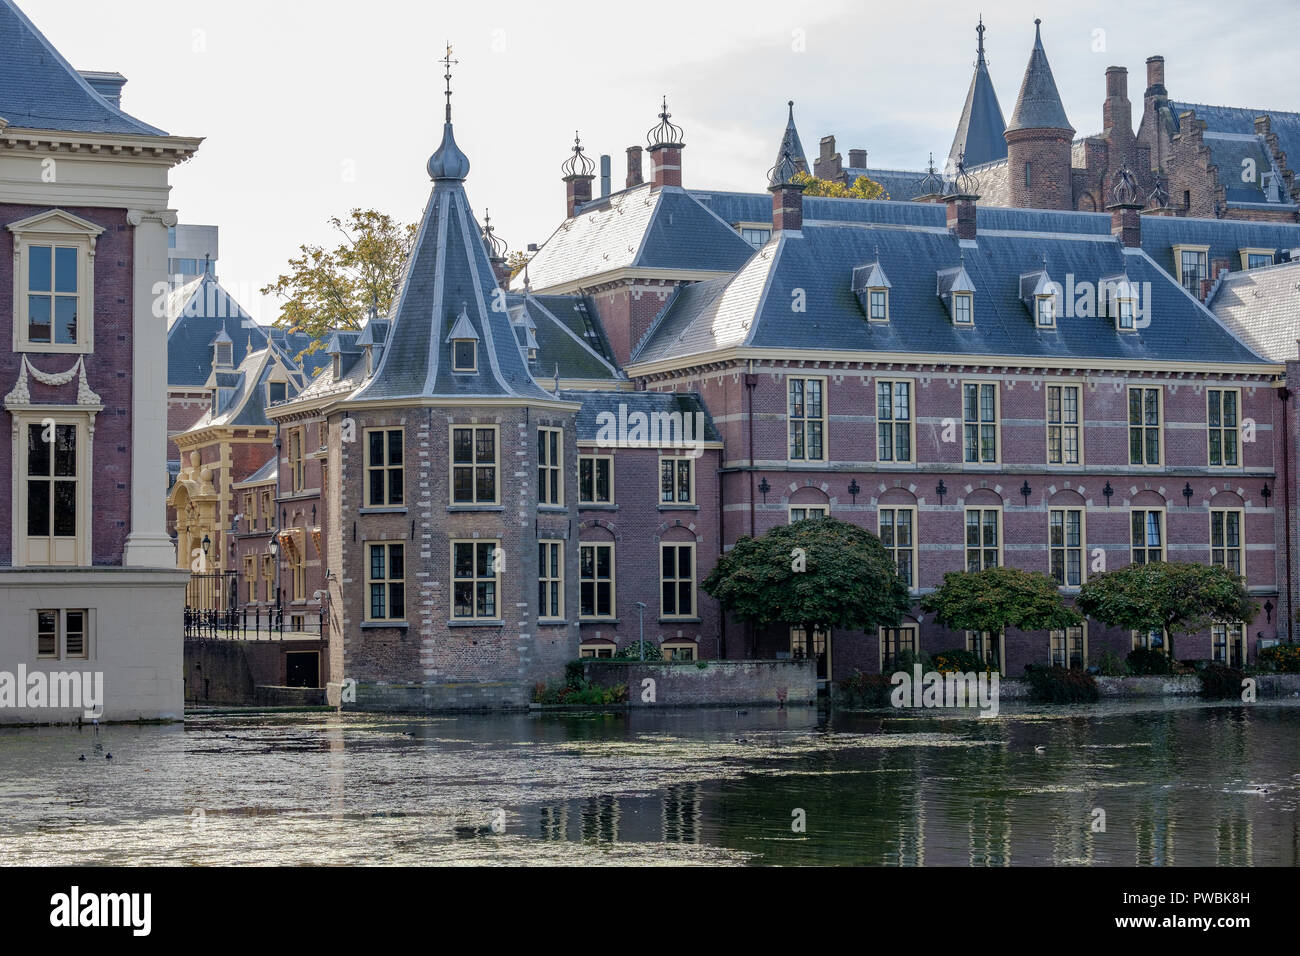 The Little Tower (Het Torentje) in The Hague, office of the Prime Minister of the Netherlands. Stock Photo